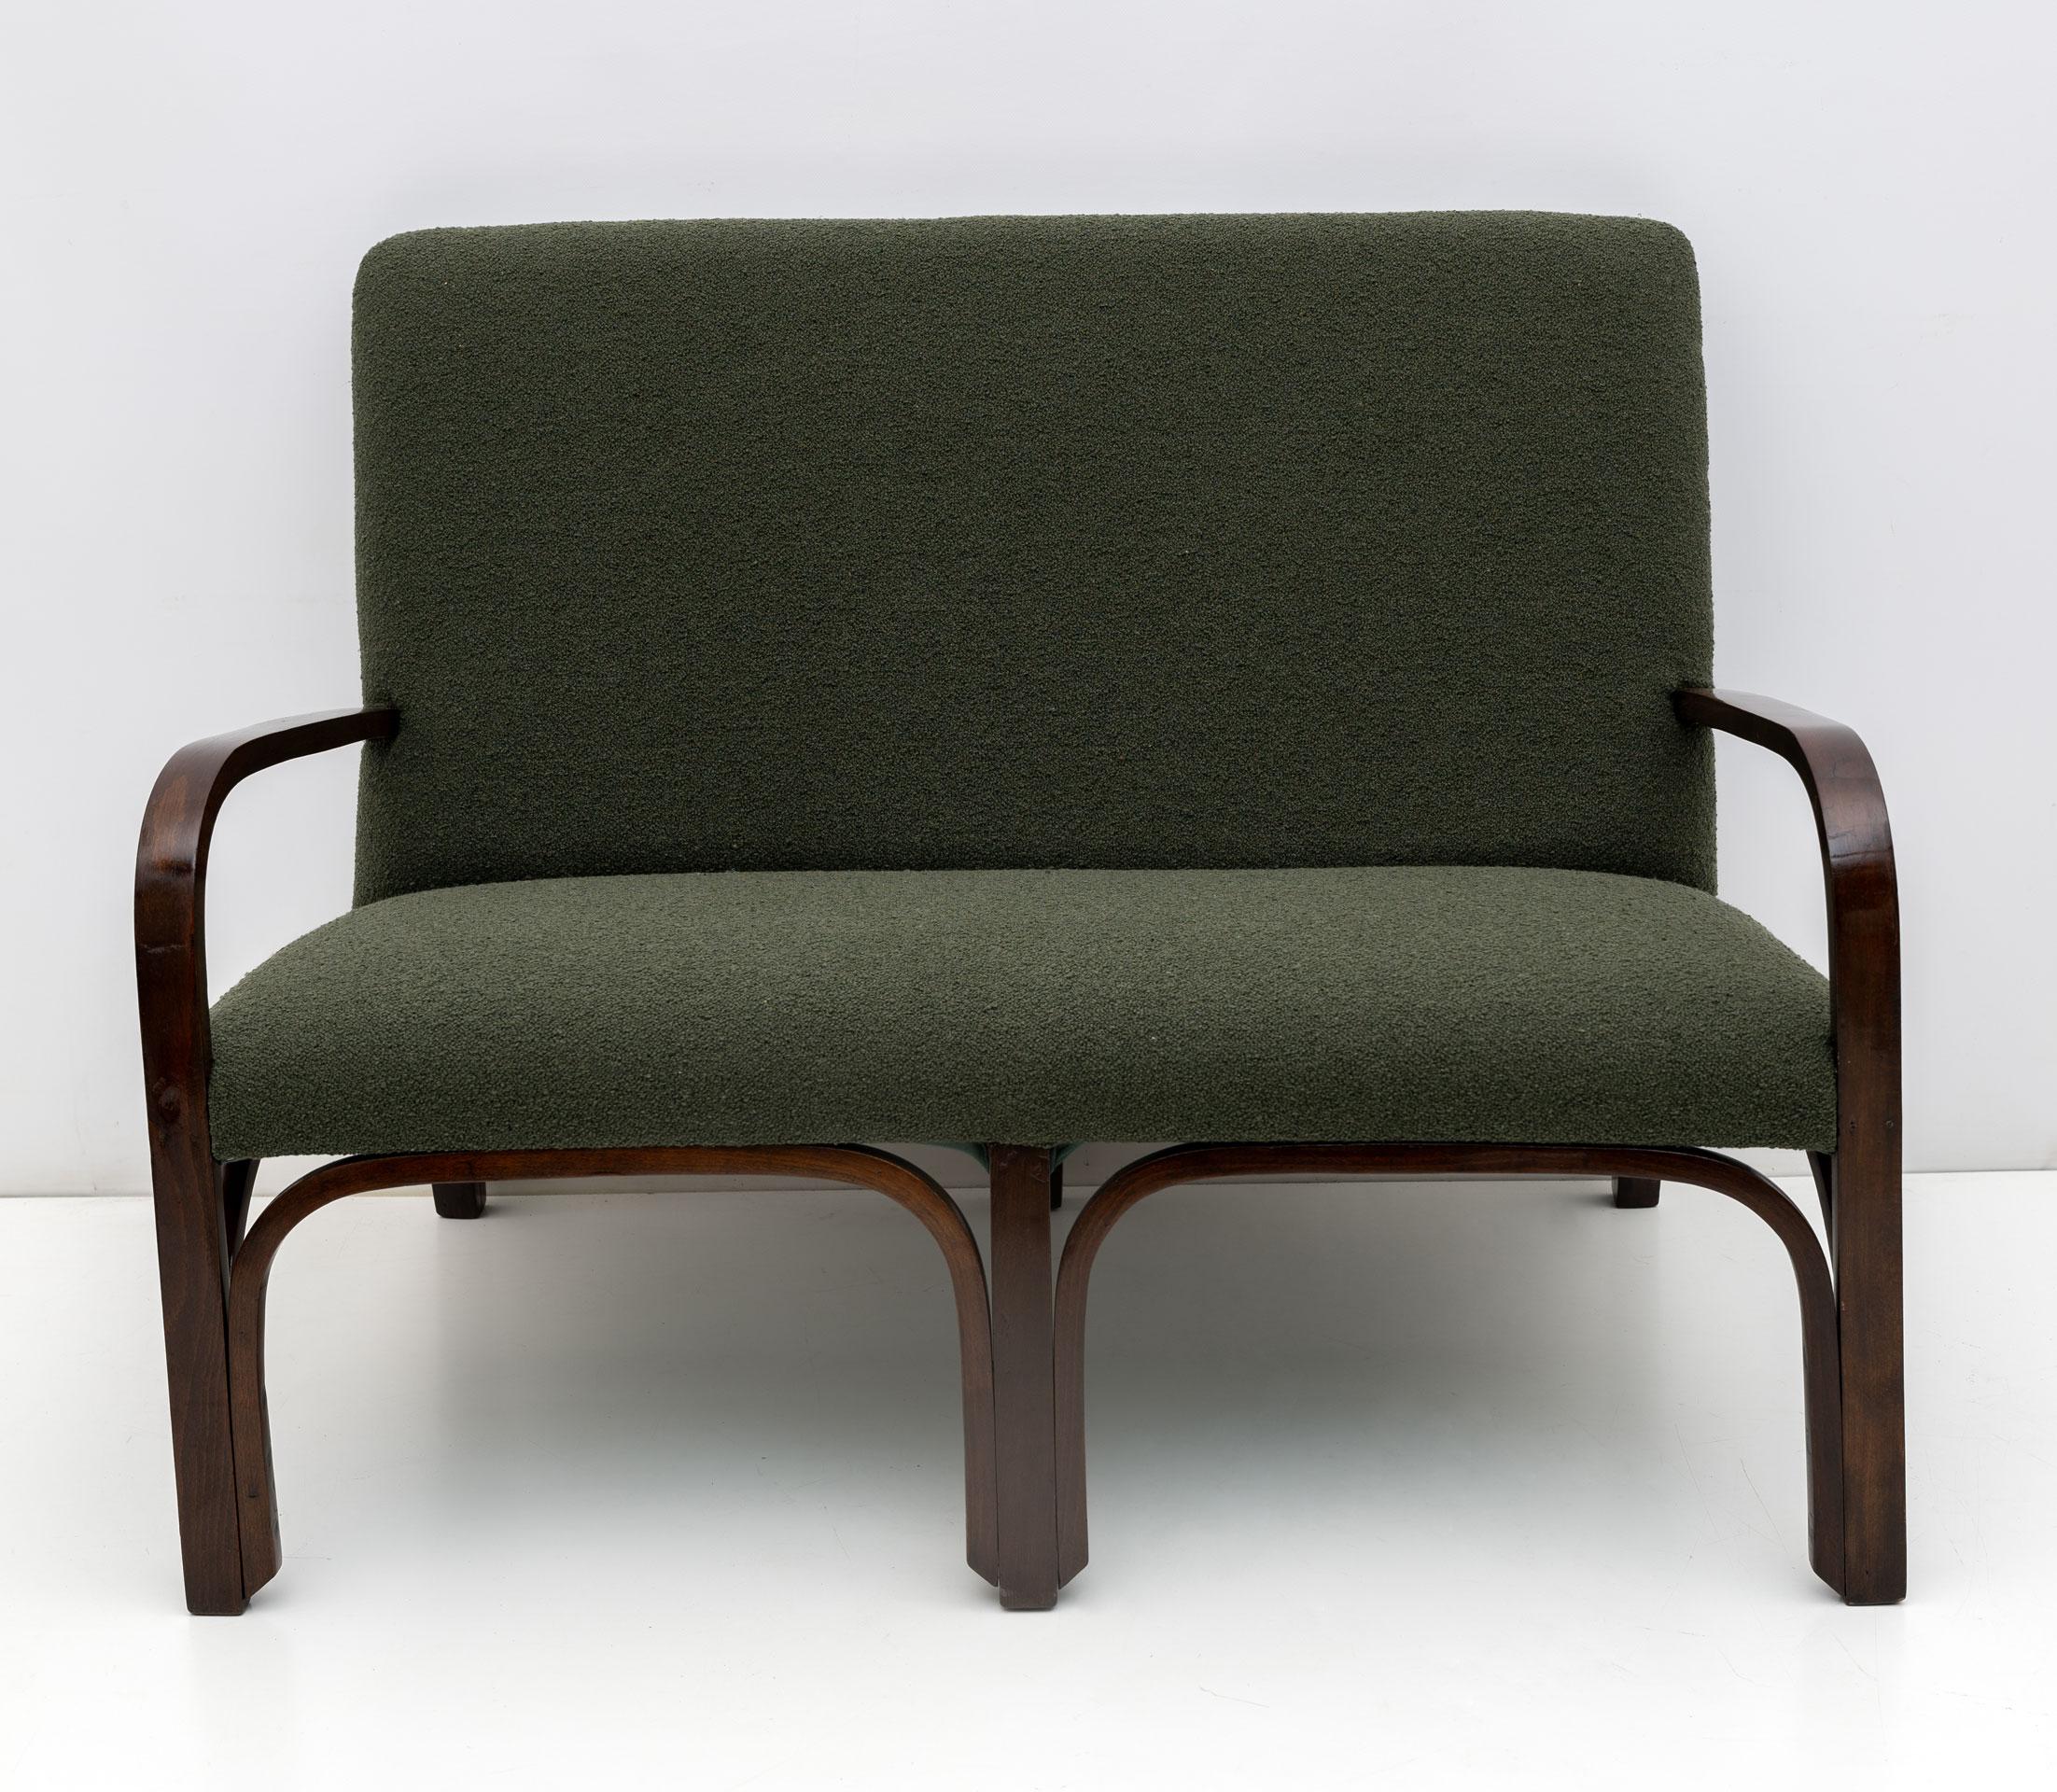 Sofa and two armchairs produced in Italy in the 1930s in Art Deco style. The set has been completely restored and covered in green bouclé. Ready to furnish your home.
The armchairs measure cm:
W55 x D74 x H82